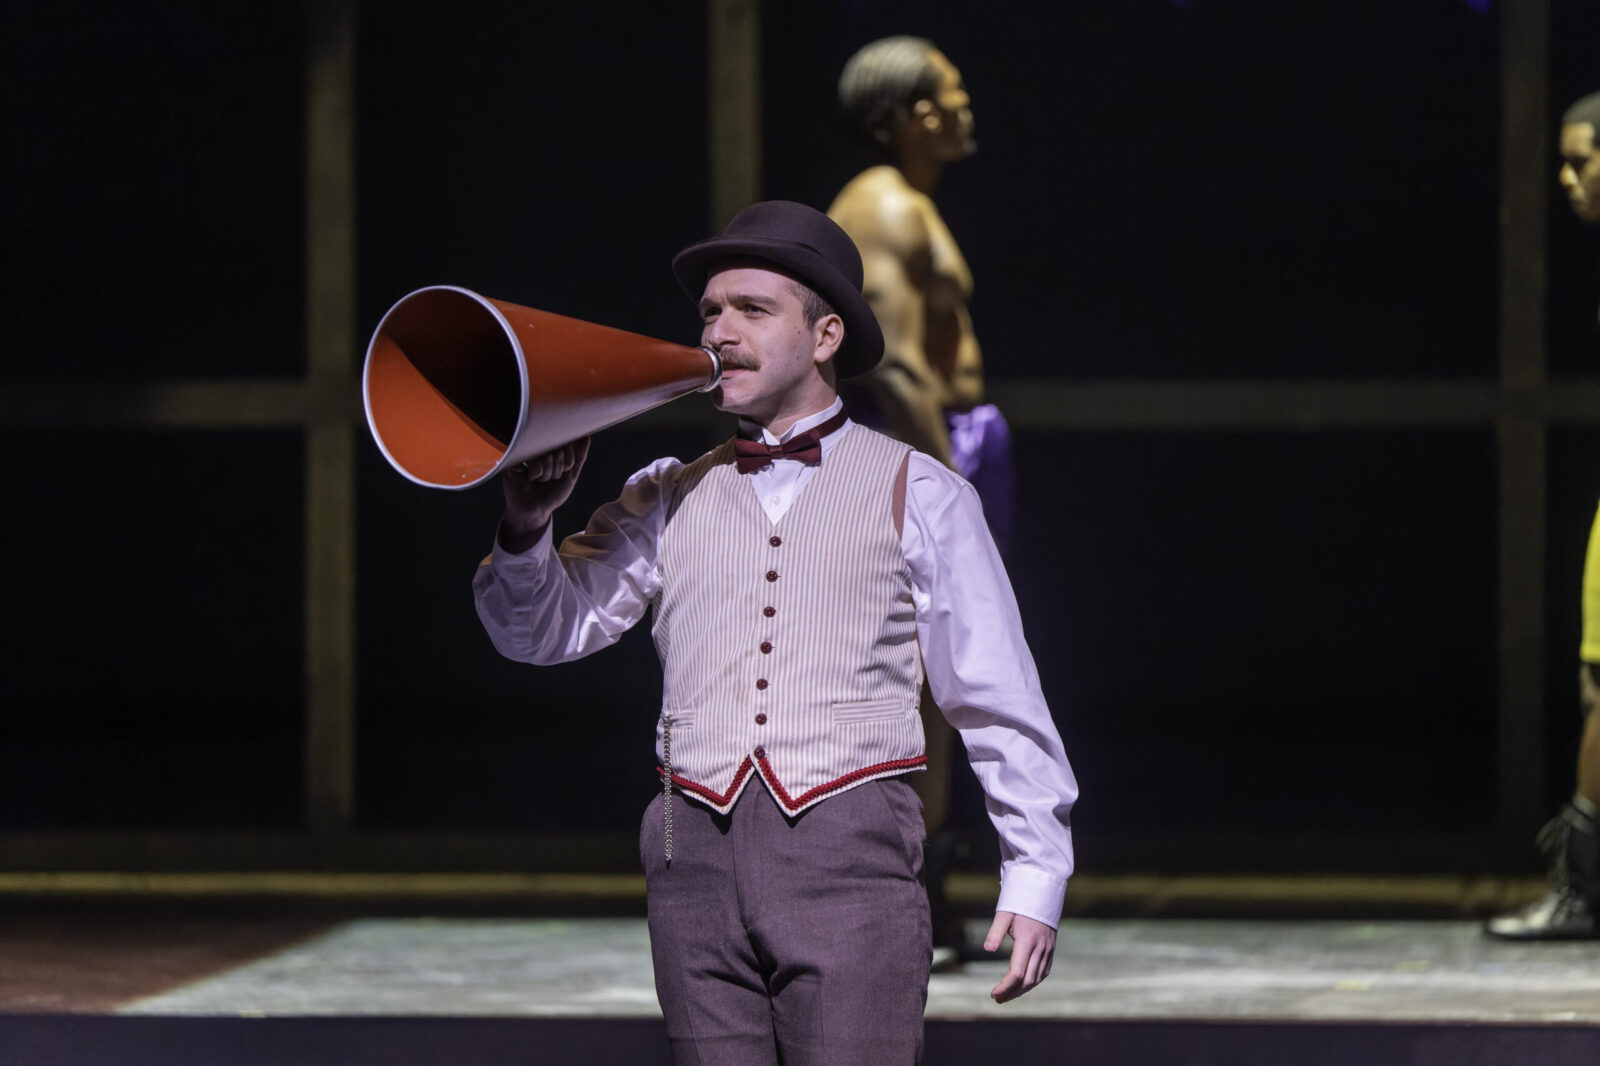 actor on stage speaks through a megaphone